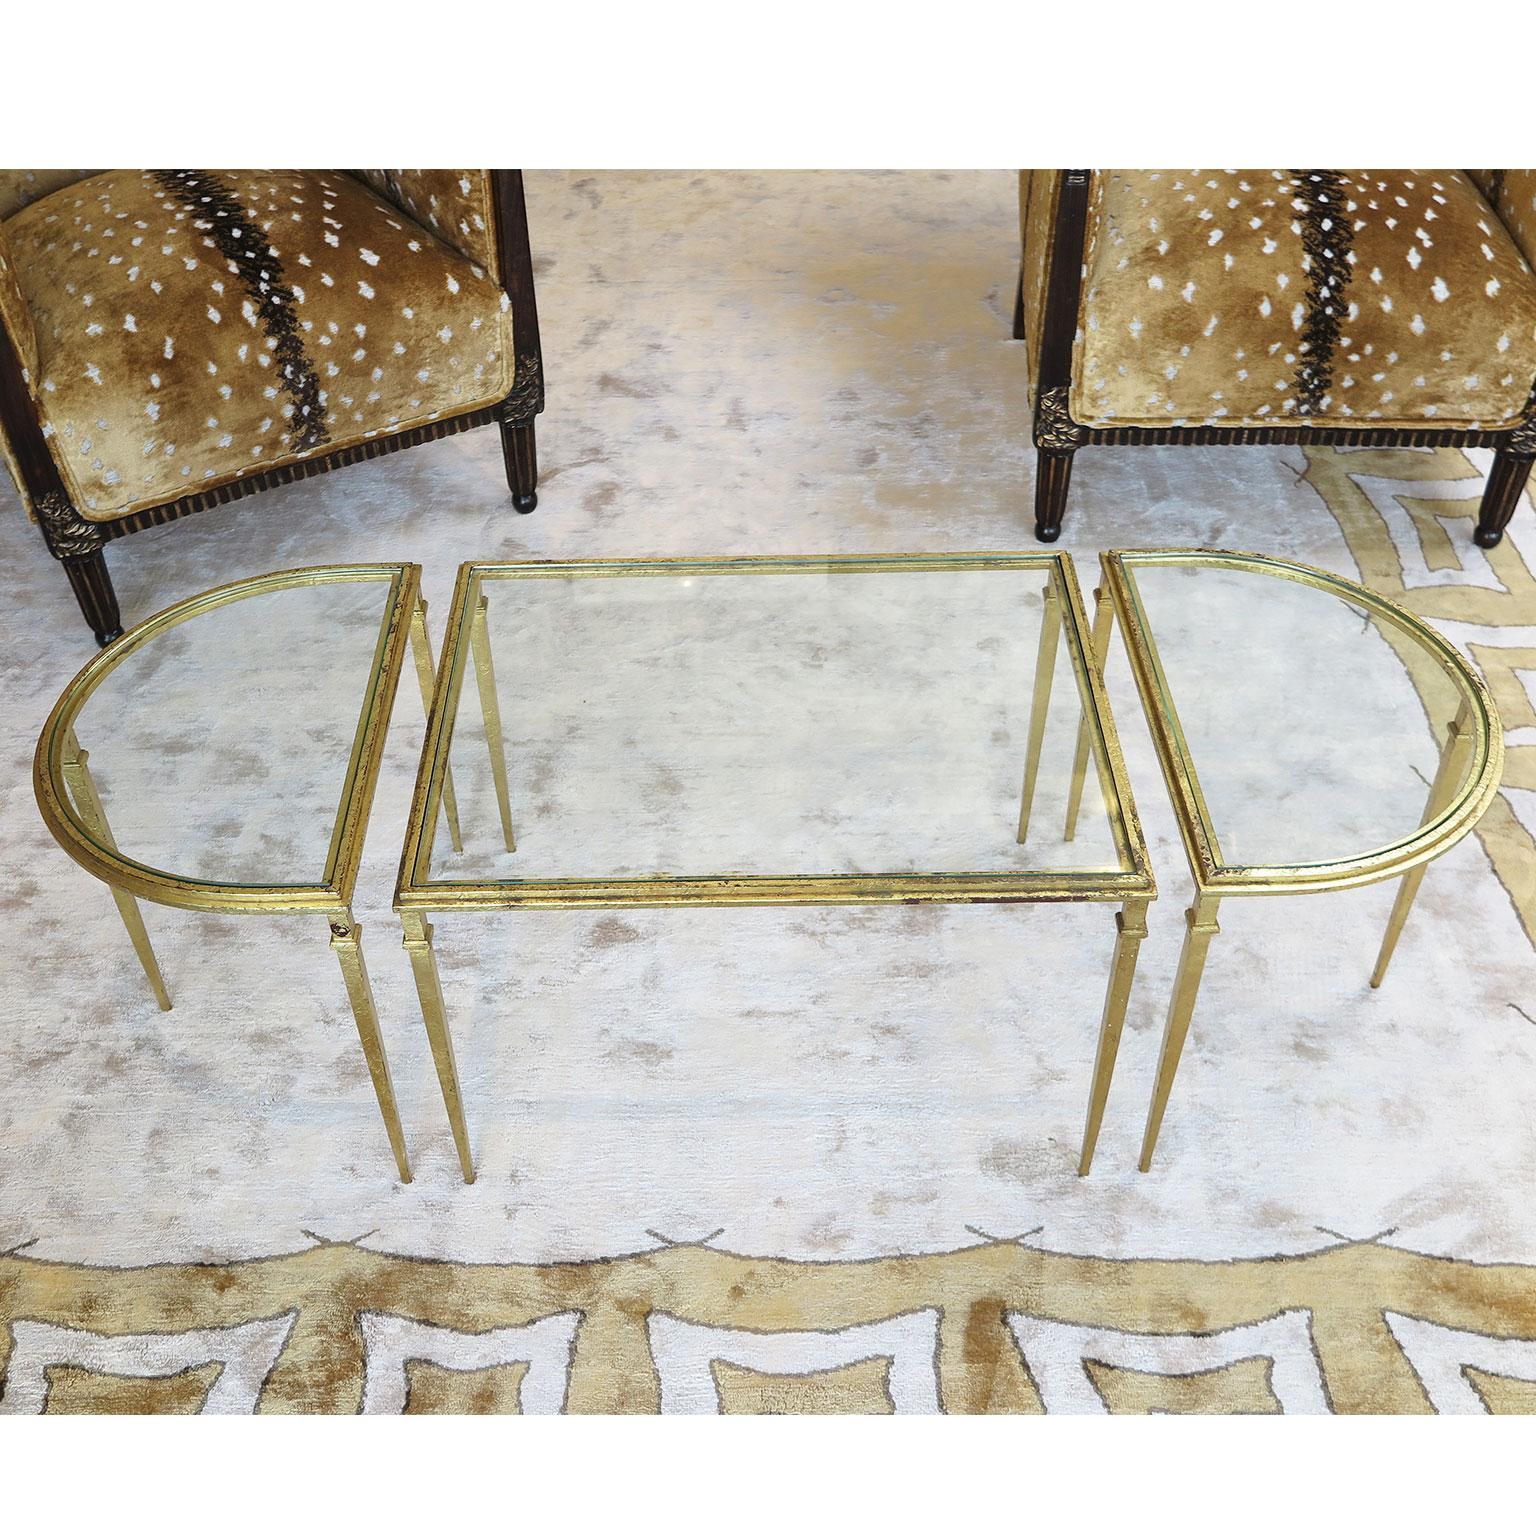 Art Deco Three-Piece Glass Coffee Table in Gold Leaf with Demilune Sides